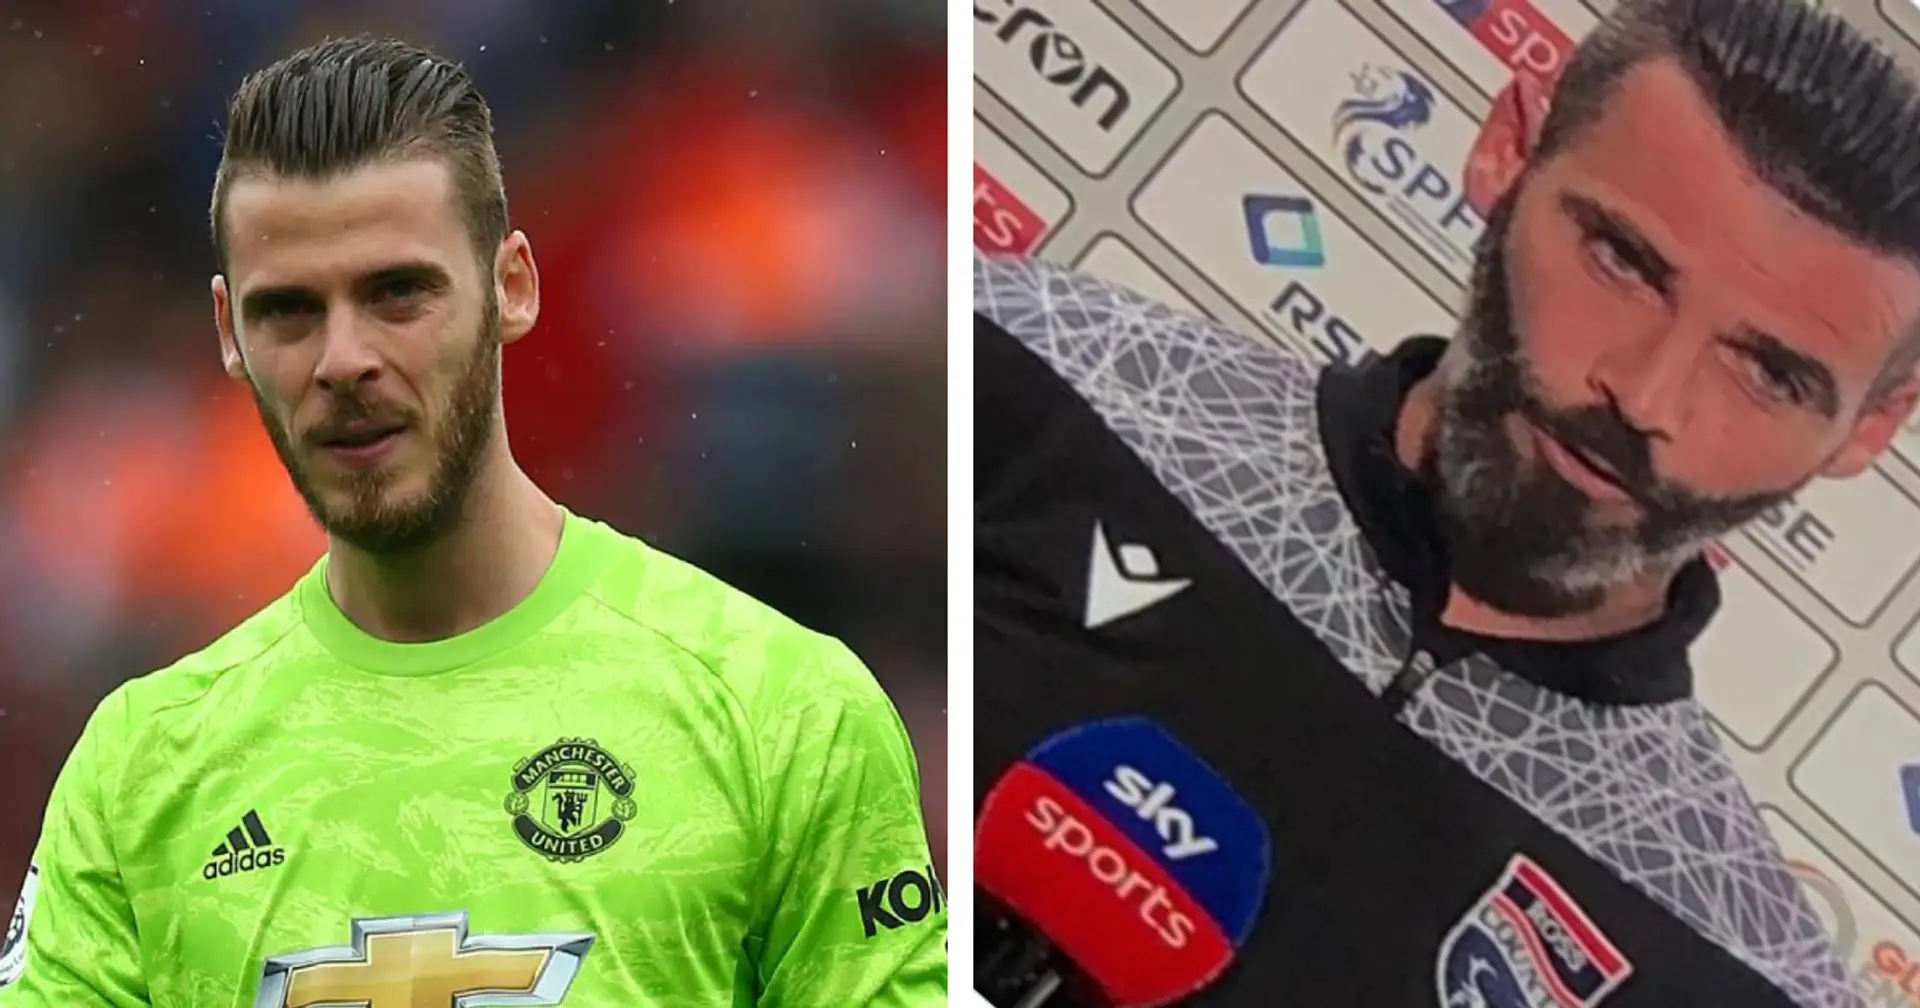 Seeing double? David De Gea shocked by doppelganger Ross County manager